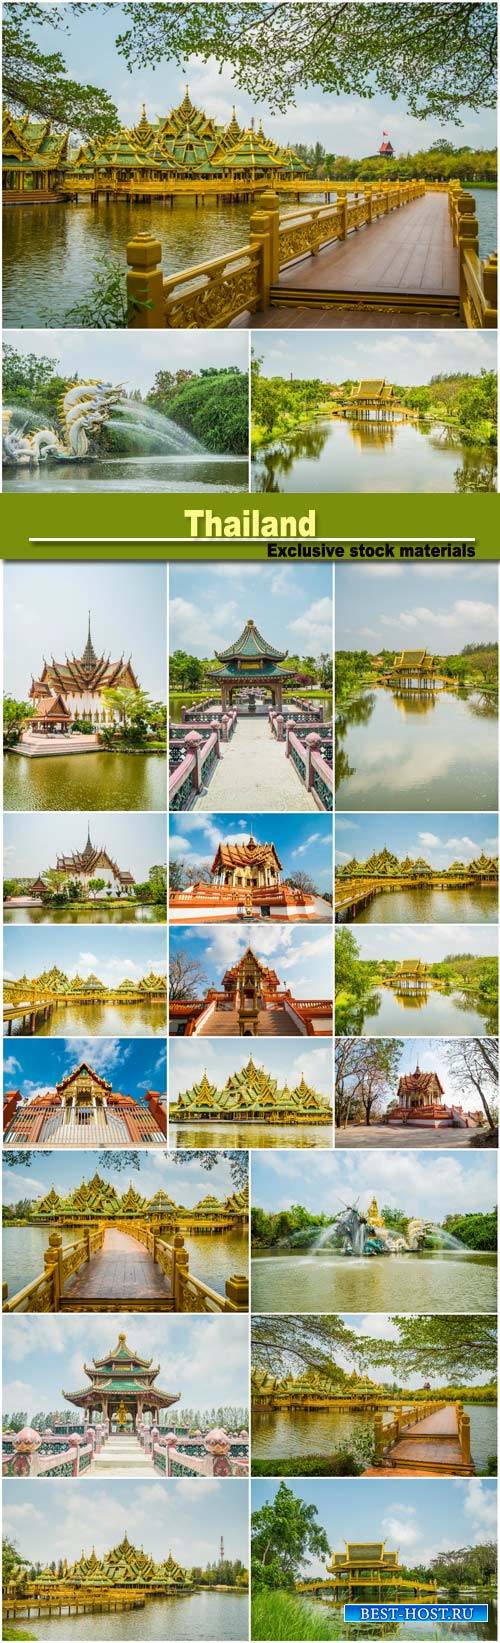 Pavilion of the Enlightened, Ancient City, Thailand